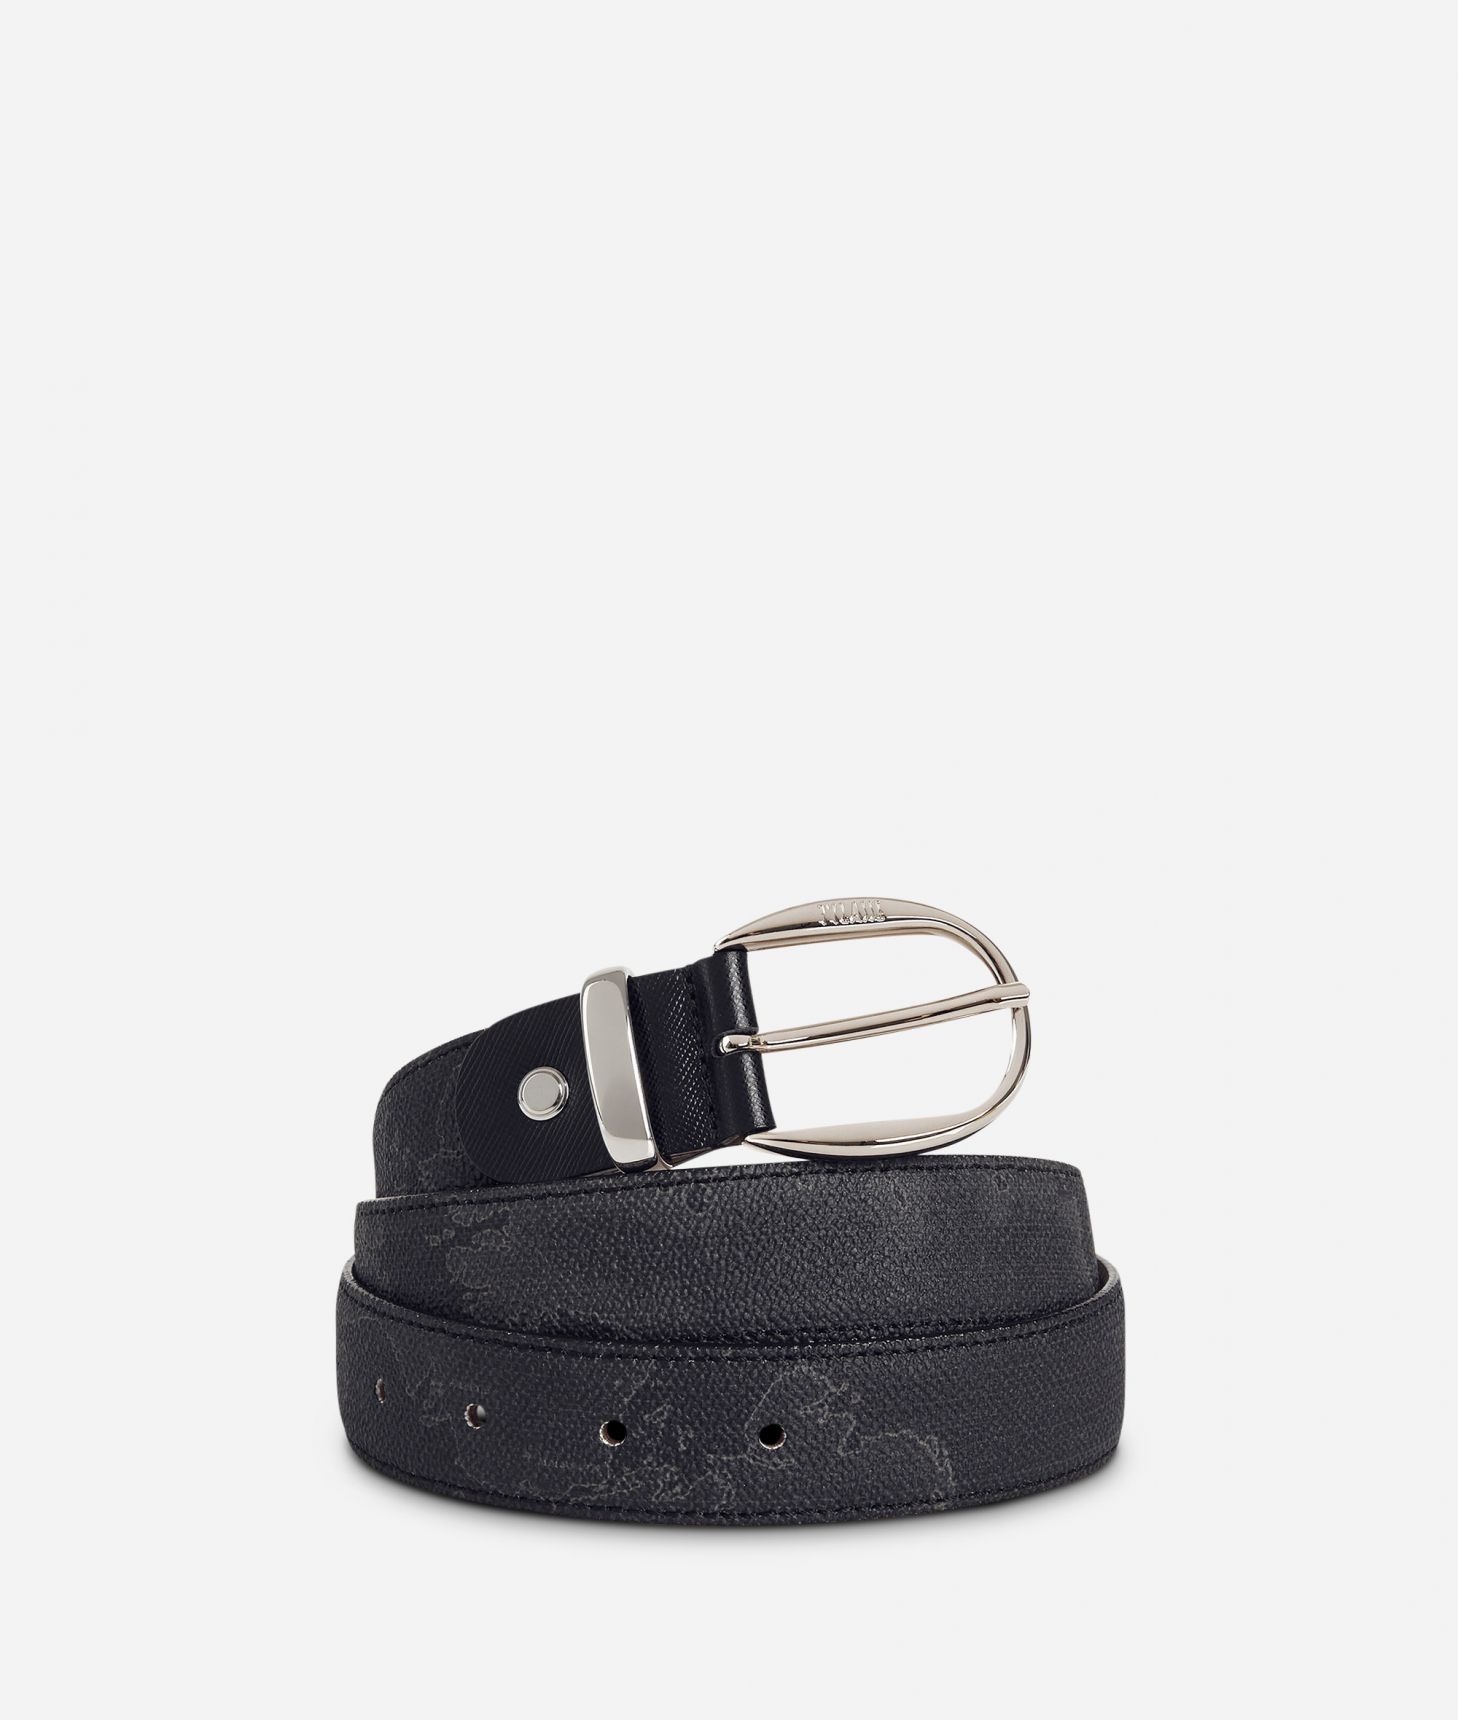 Geo Black Belt with leather inserts,front